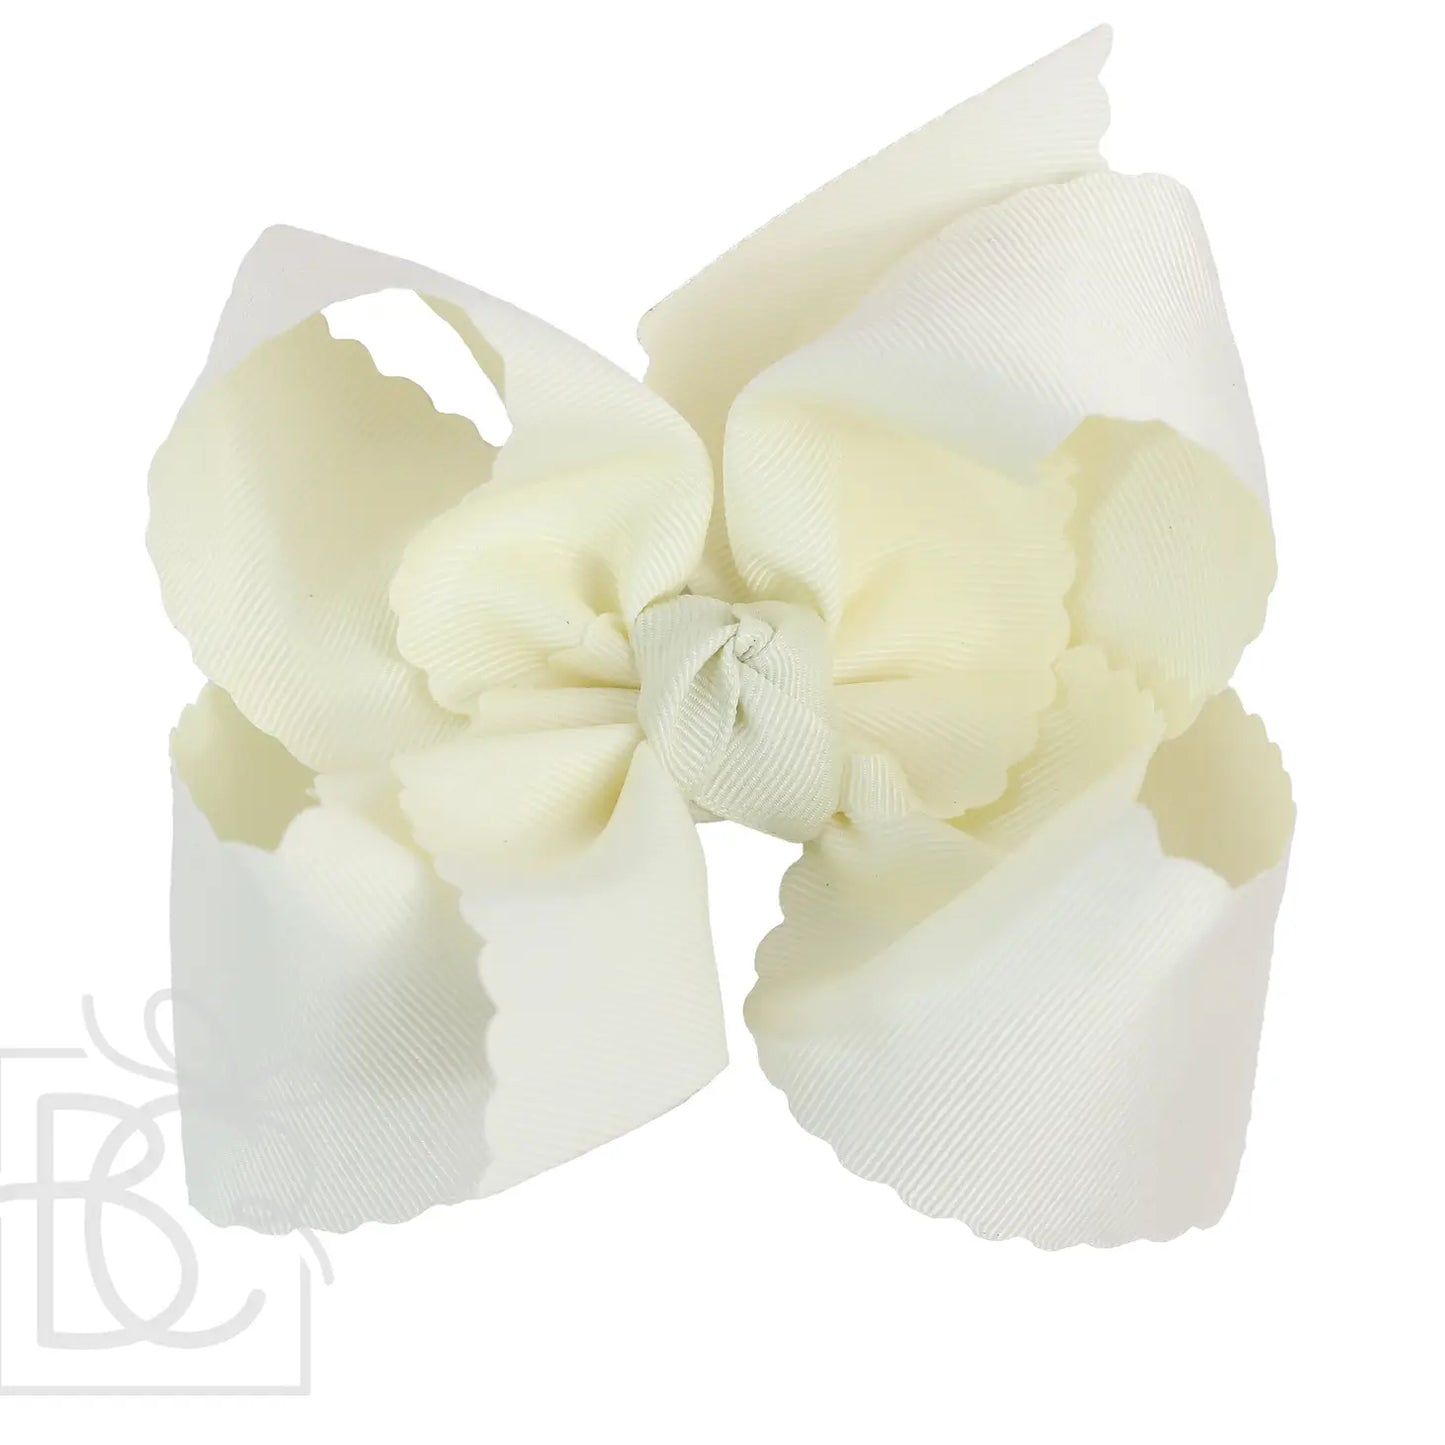 XL Scalloped Edge Bow in Antique White  - Doodlebug's Children's Boutique